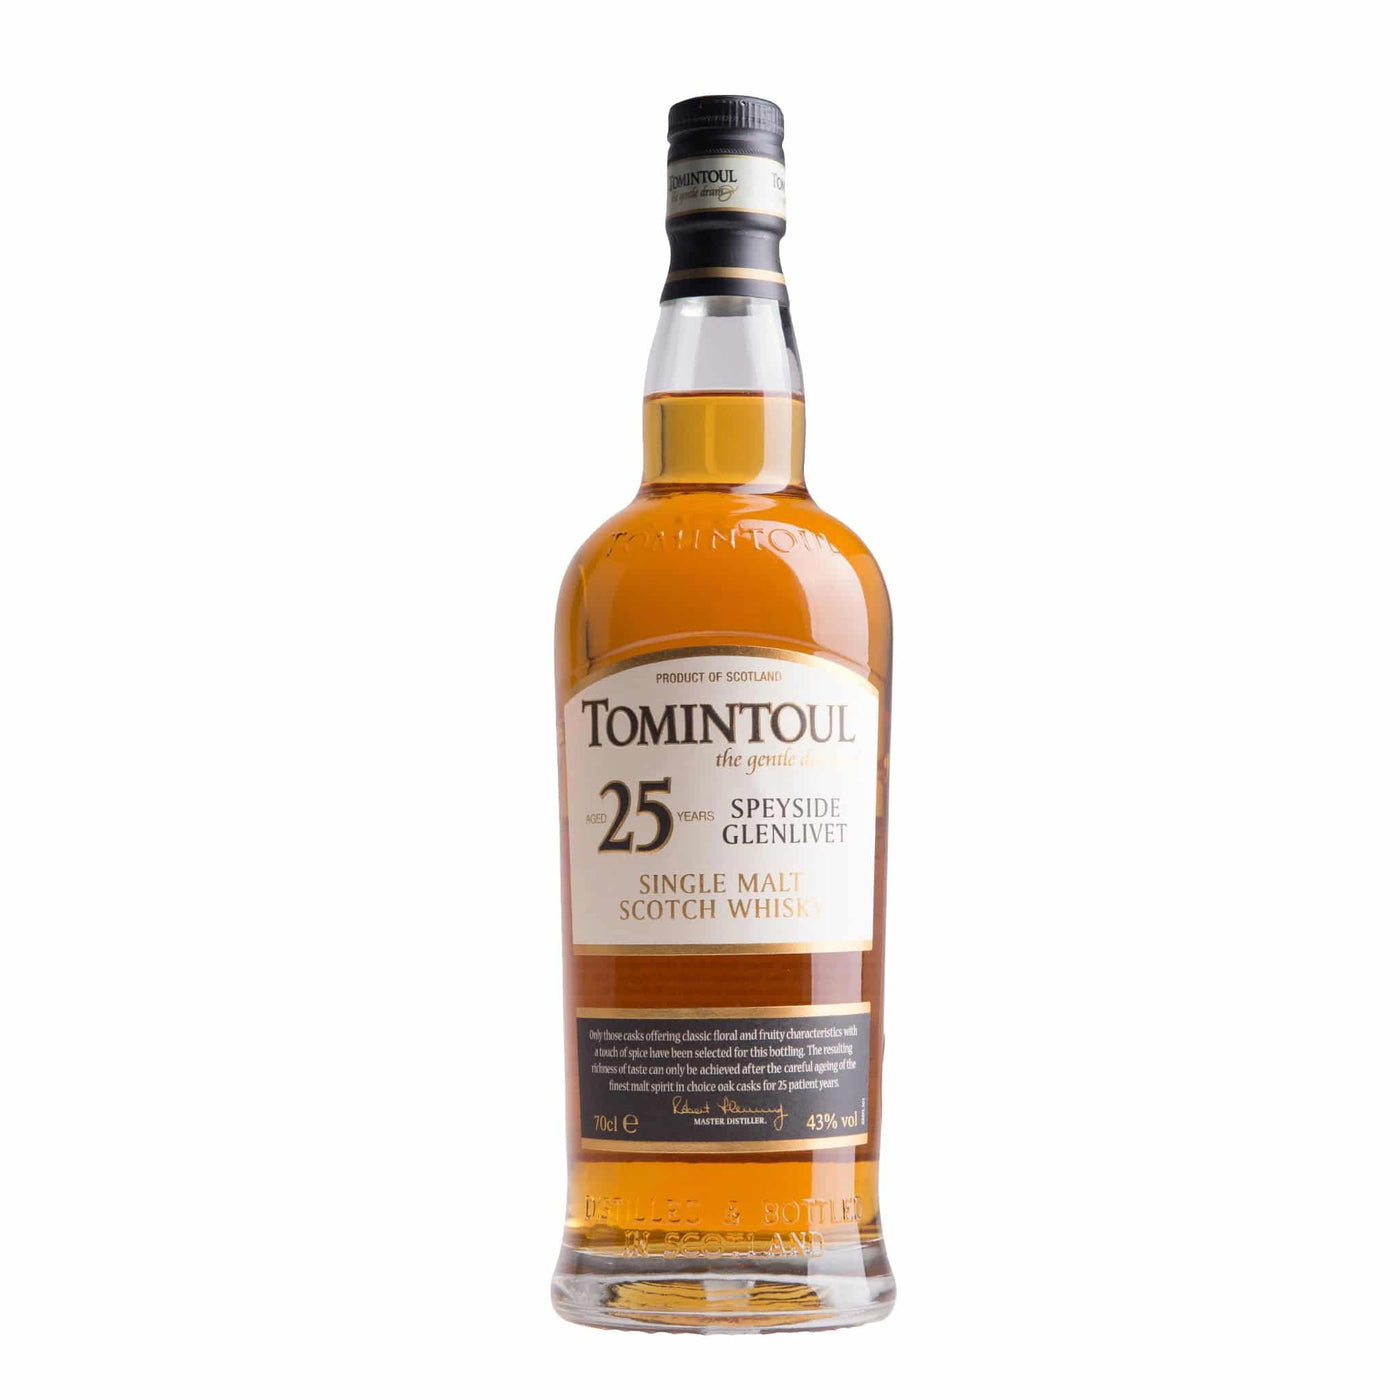 Tomintoul 25 Years Whisky - Spiritly